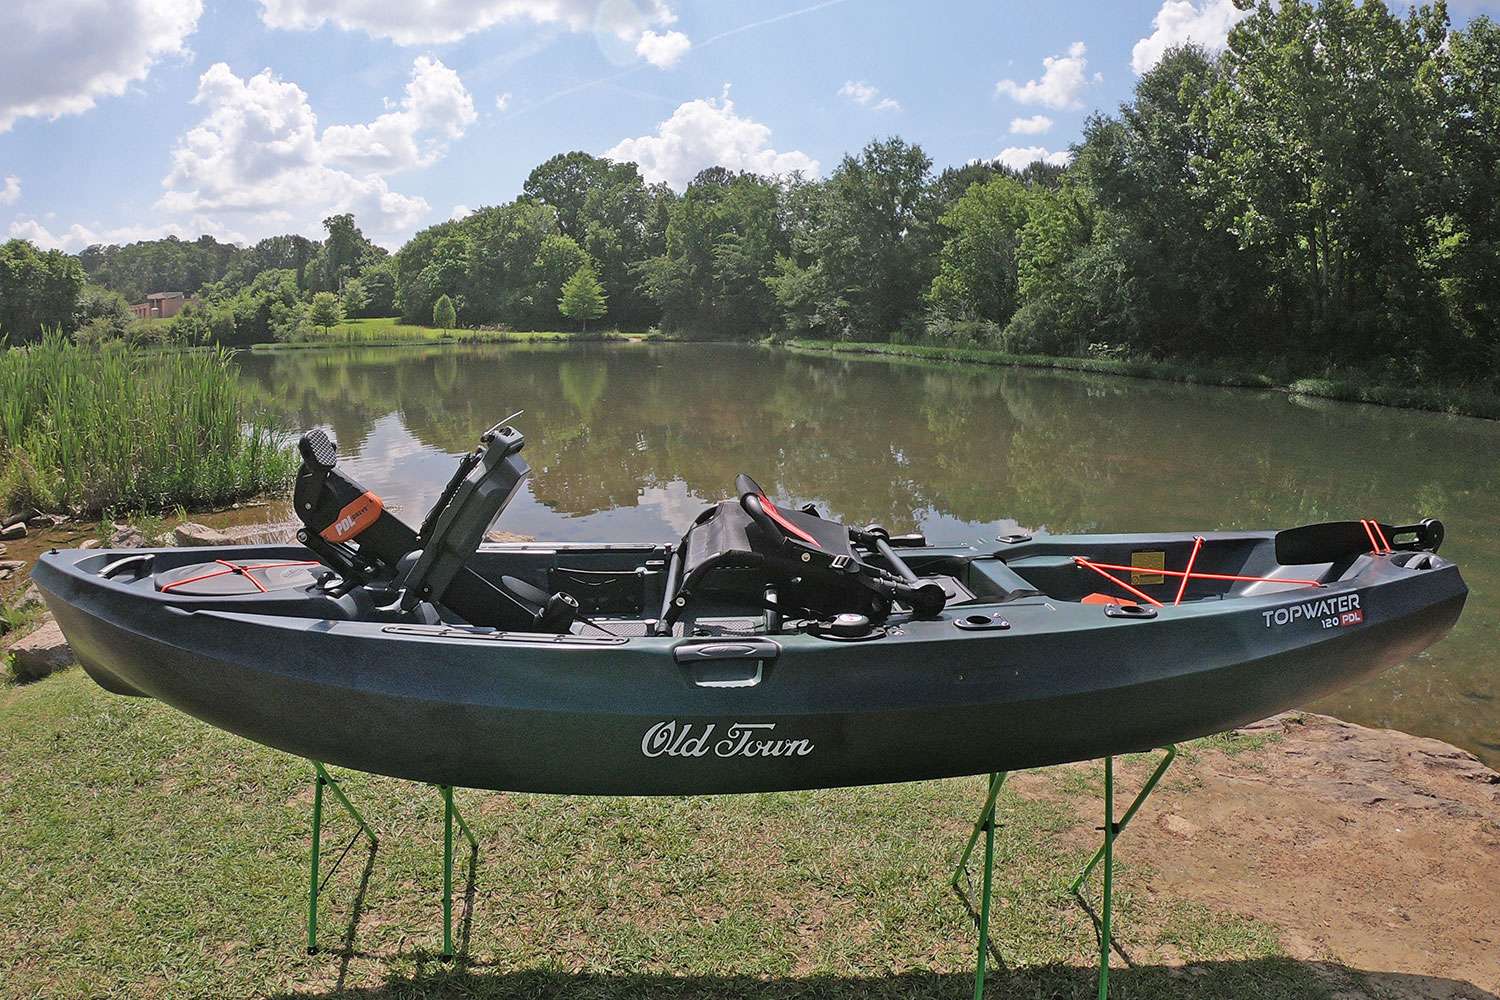 The new Topwater 120 from Old Town comes in two models, a PDL version with the company's proprietary drive system. The other version features the same layout, but in a paddle-only model. 